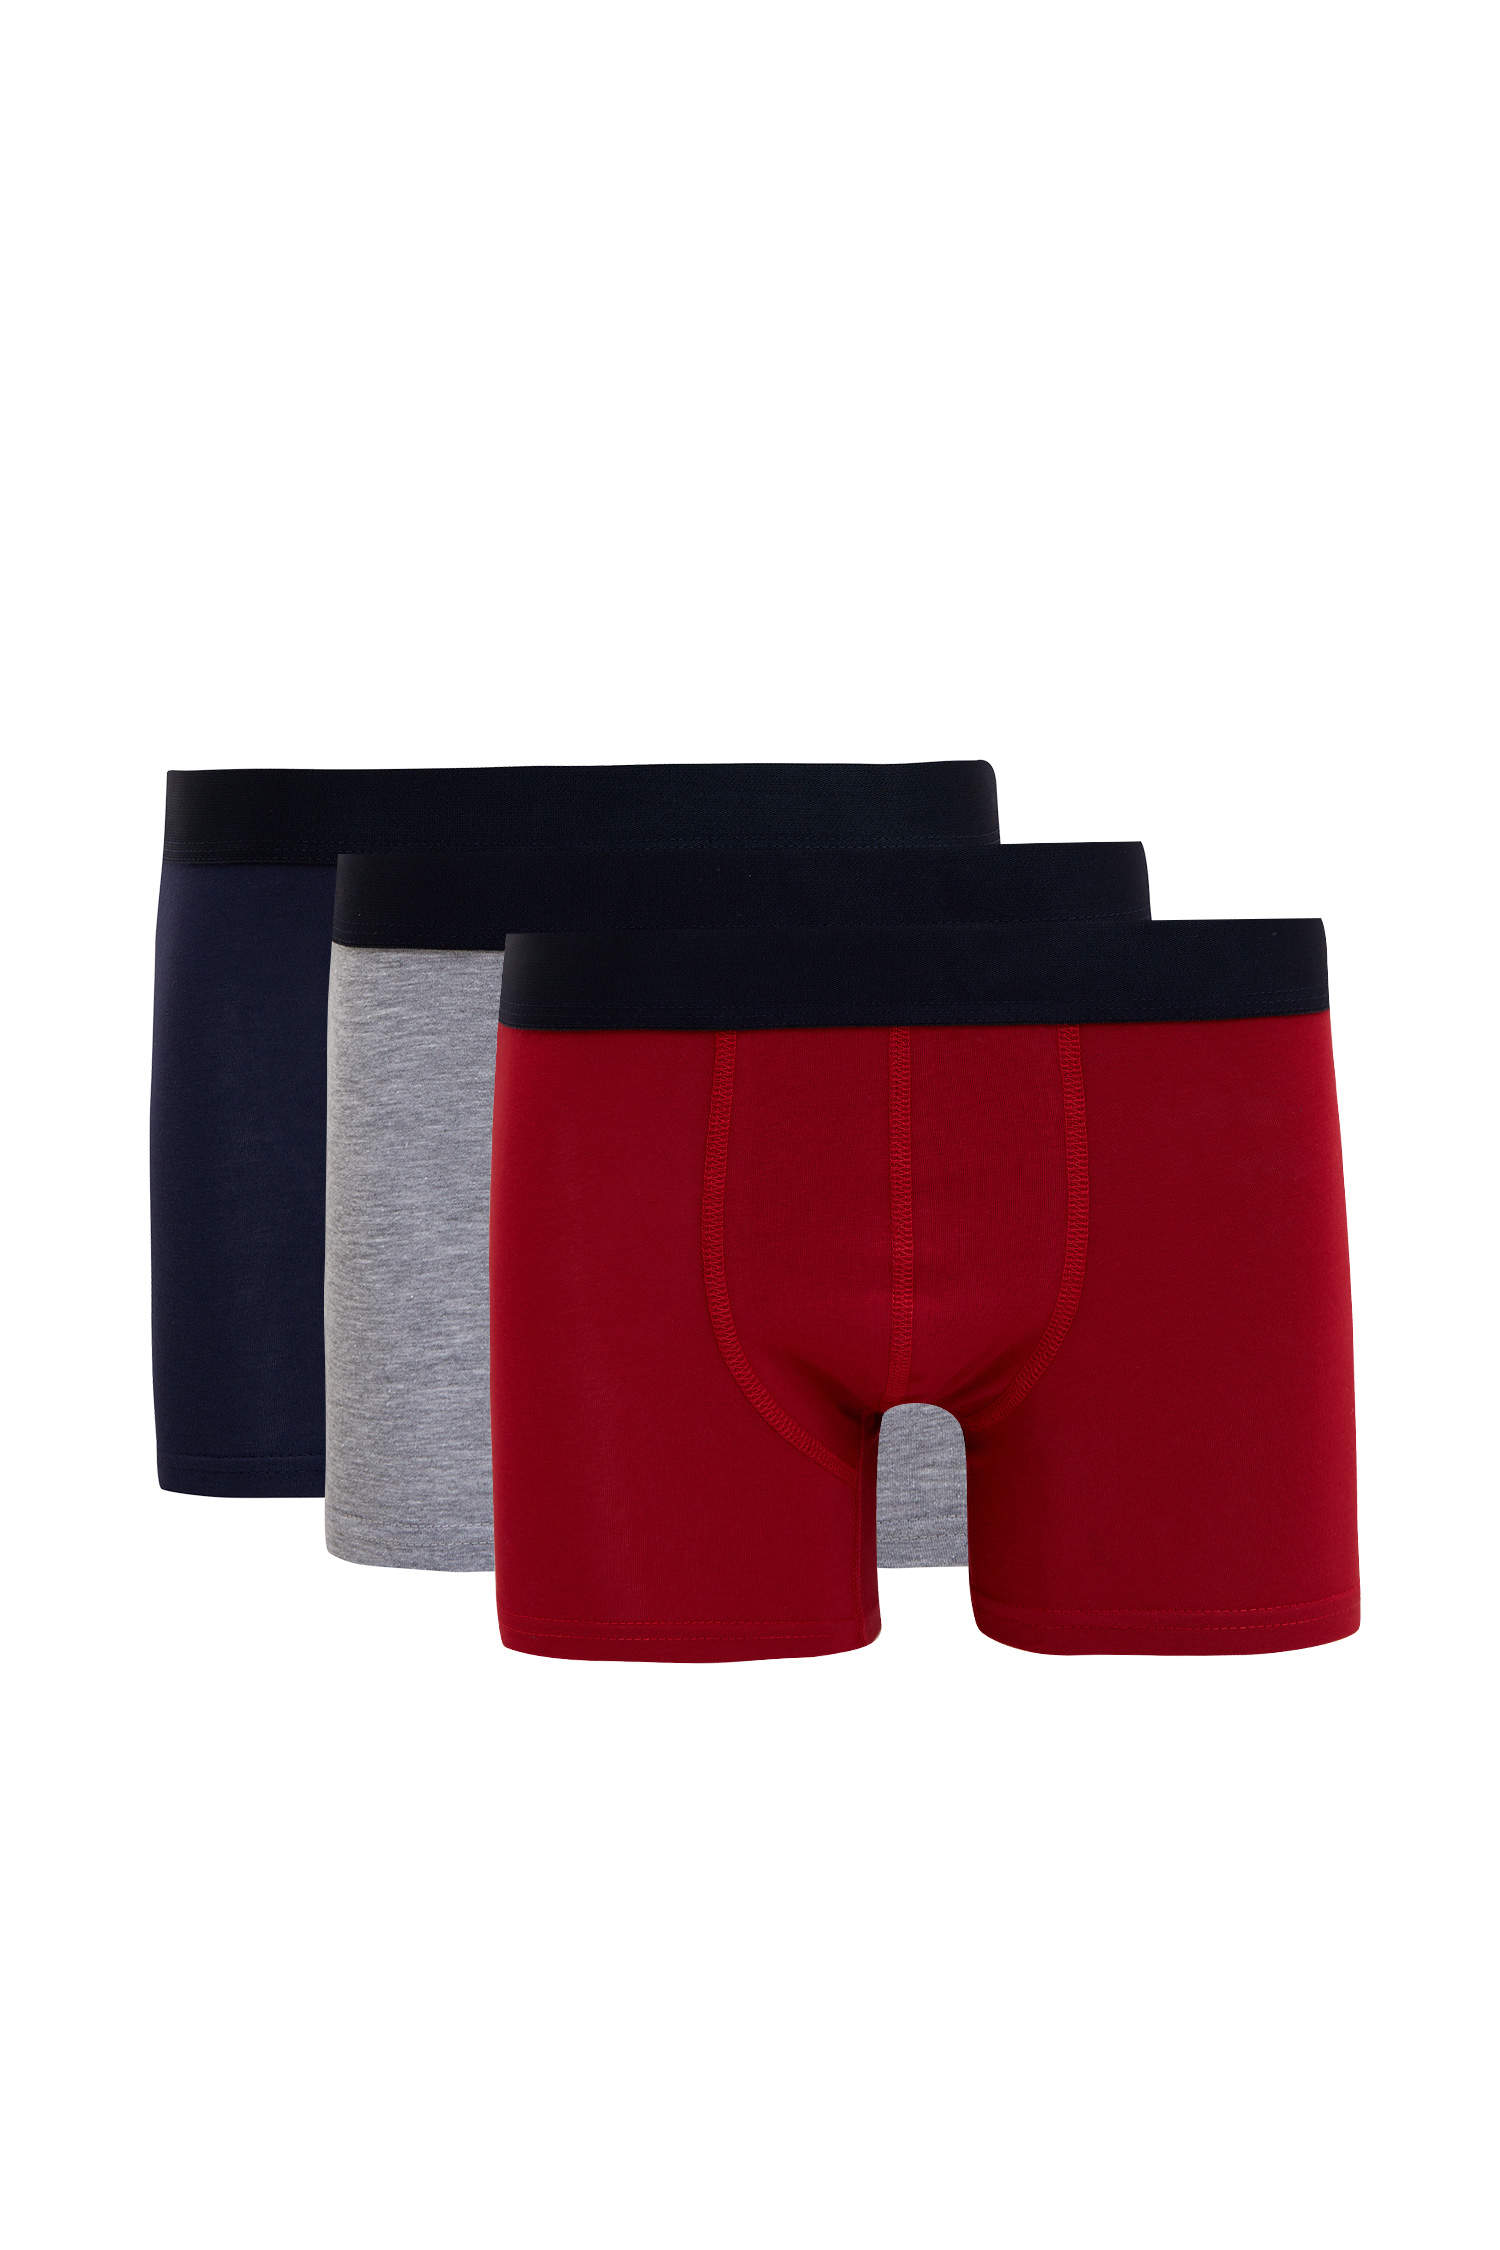 Red MAN 3 Pack Flexible Fabric Standard Mold Boxer 1219847 | DeFacto